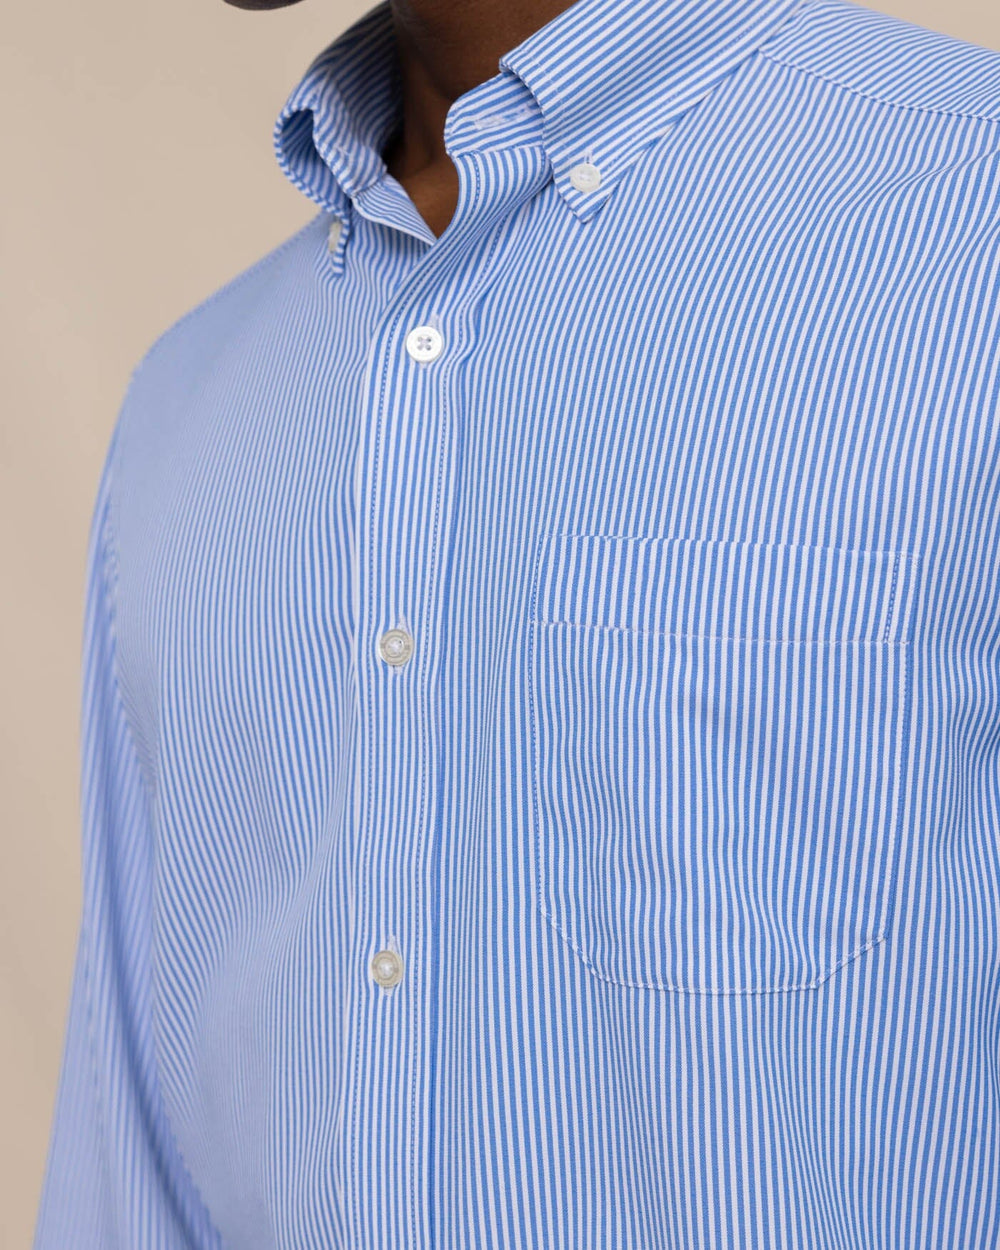 The detail view of the Southern Tide Bengal Stripe brrr°® Intercoastal Sport Shirt by Southern Tide - Cobalt Blue